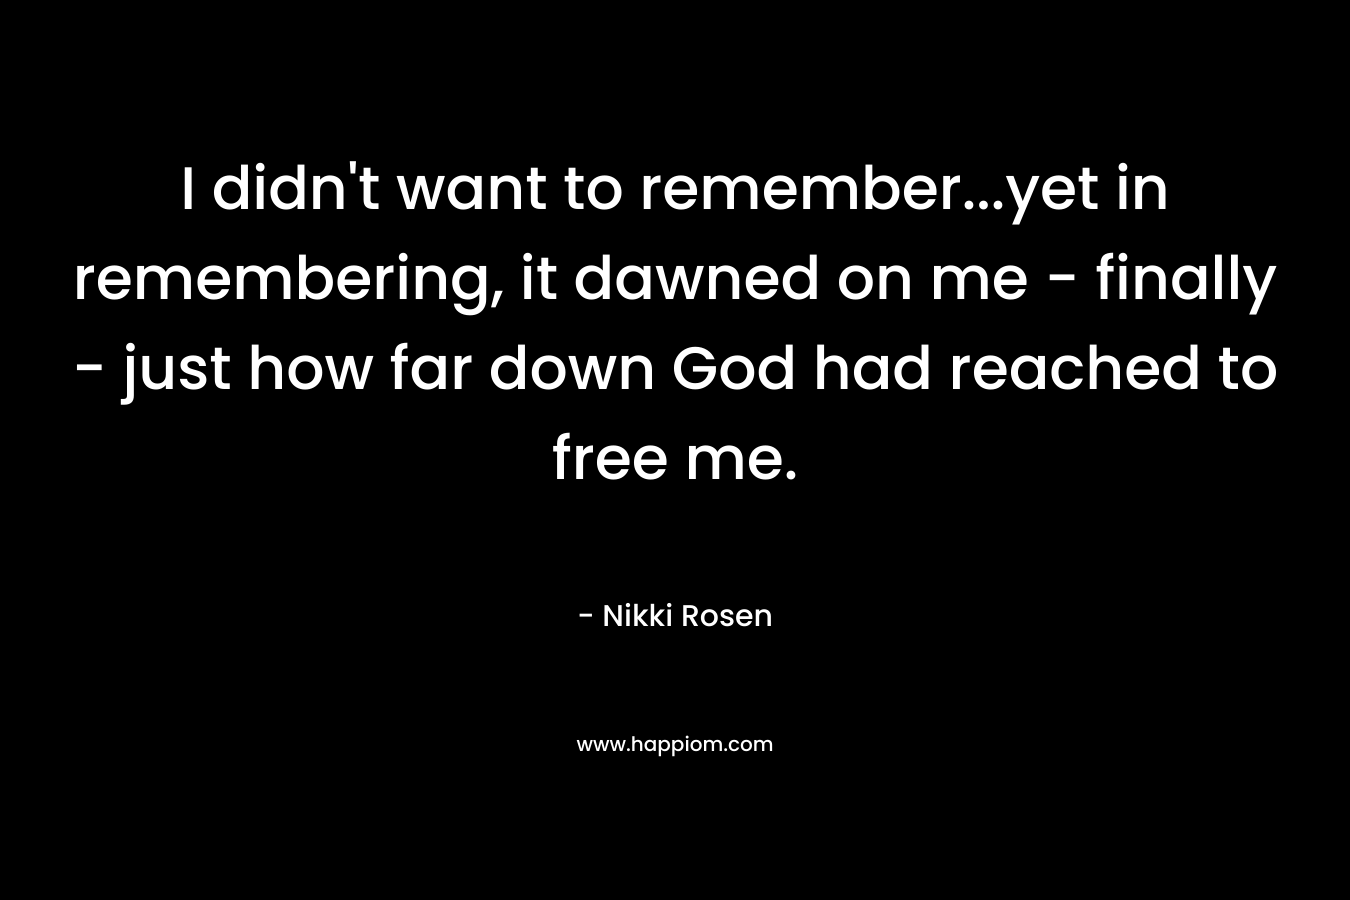 I didn't want to remember...yet in remembering, it dawned on me - finally - just how far down God had reached to free me.